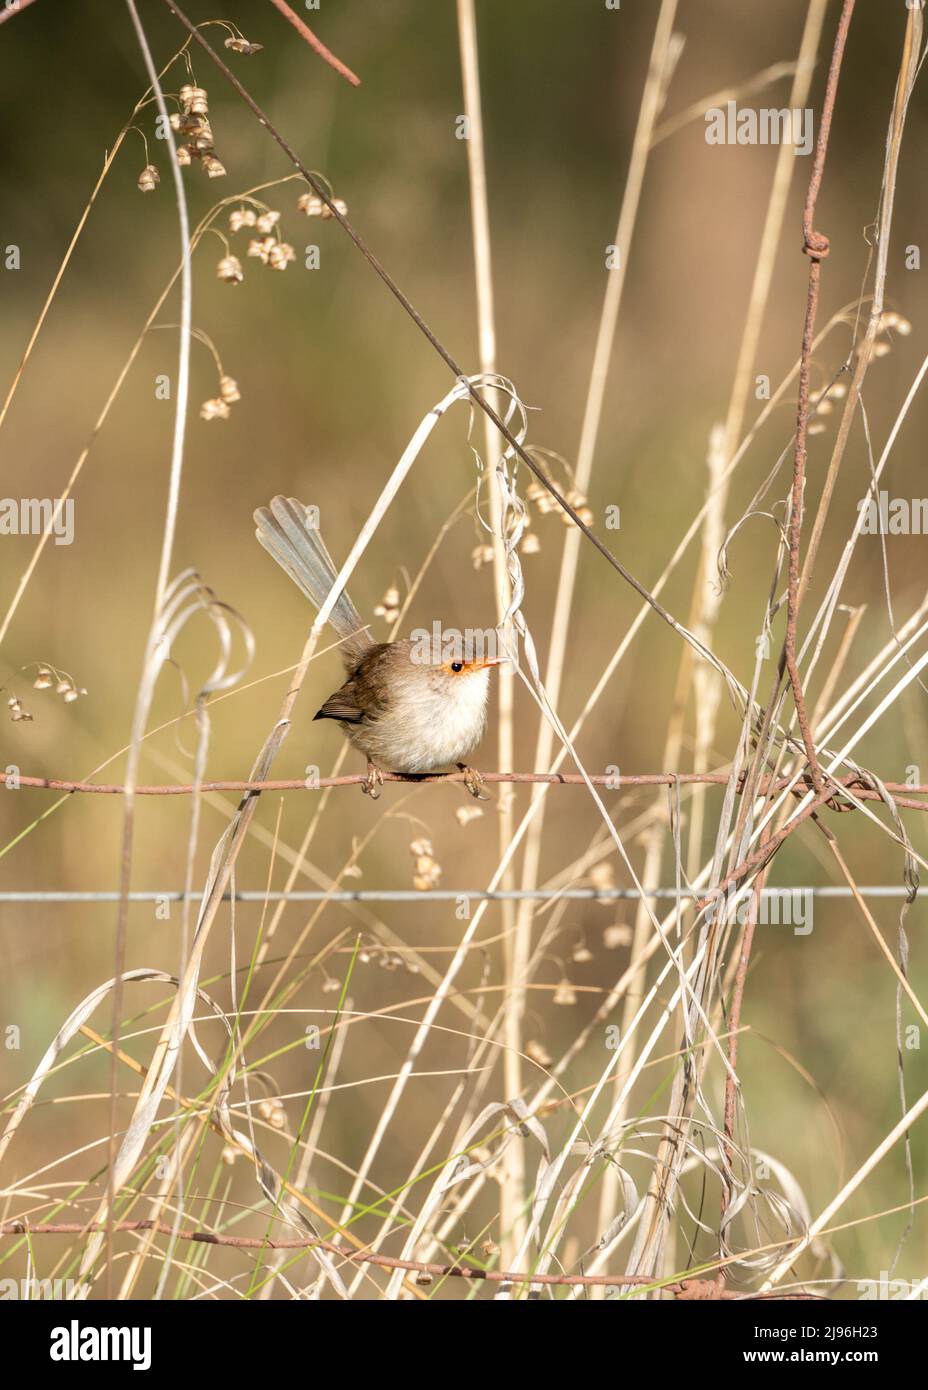 Female Superb blue wren (Malurus cyaneus) on a rural wire fence surrounded by dry grasses Stock Photo